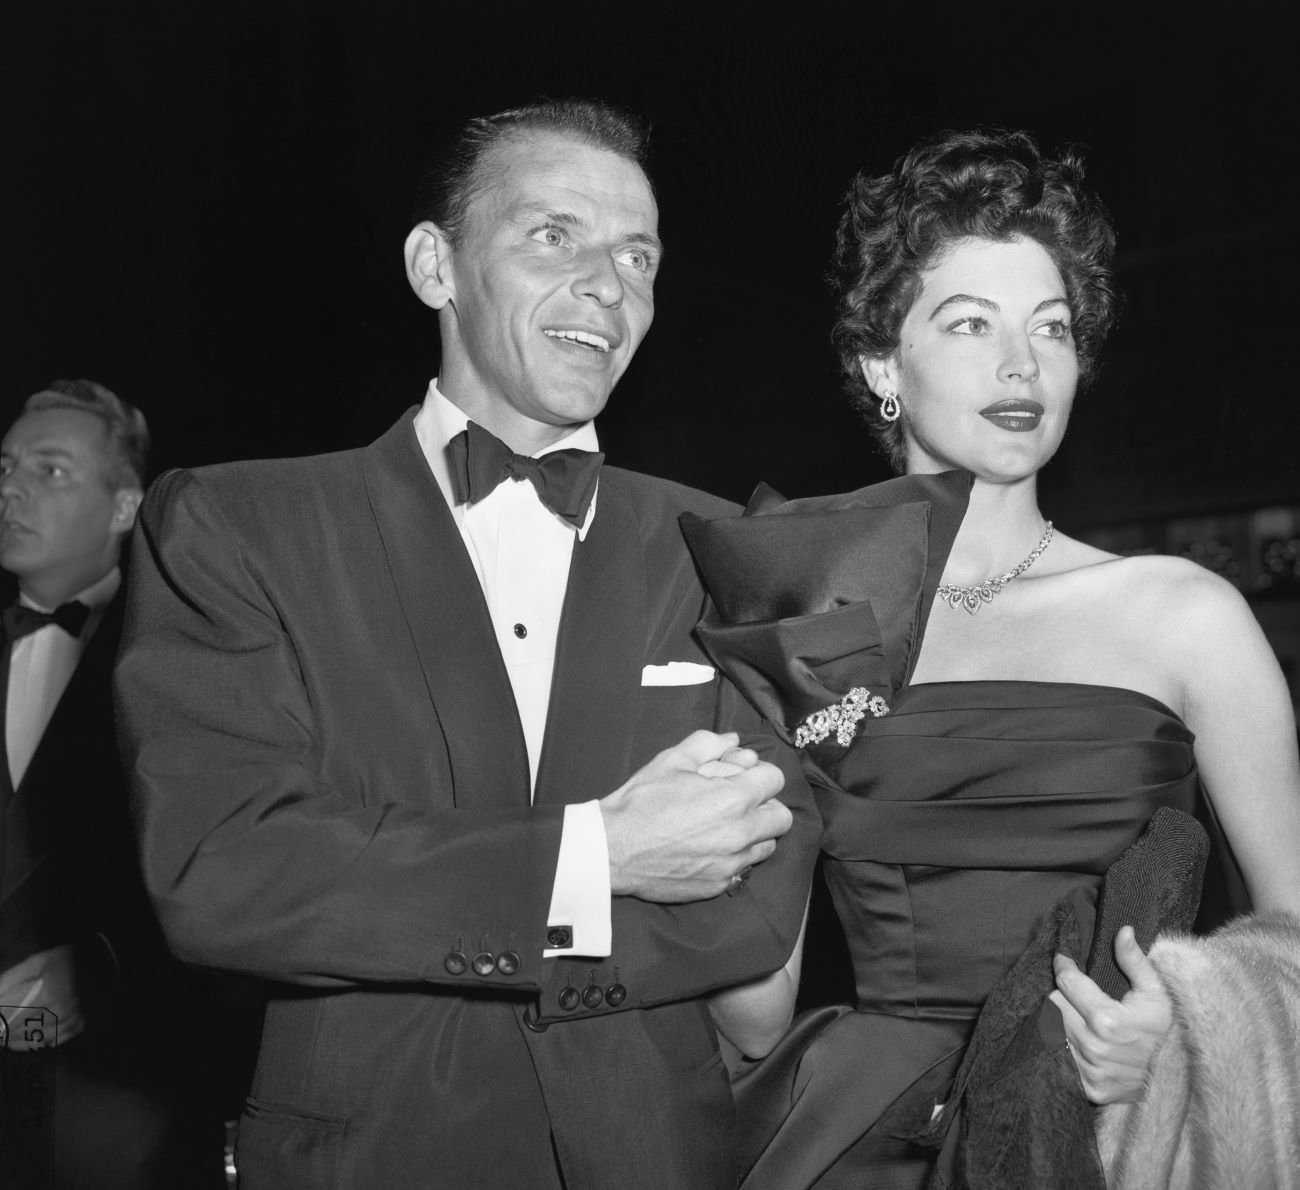 A black and white picture of Frank Sinatra in a tuxedo and Ava Gardner in a dress. Frank Sinatra and Ava Gardner's marriage lasted from 1951 to 1957.